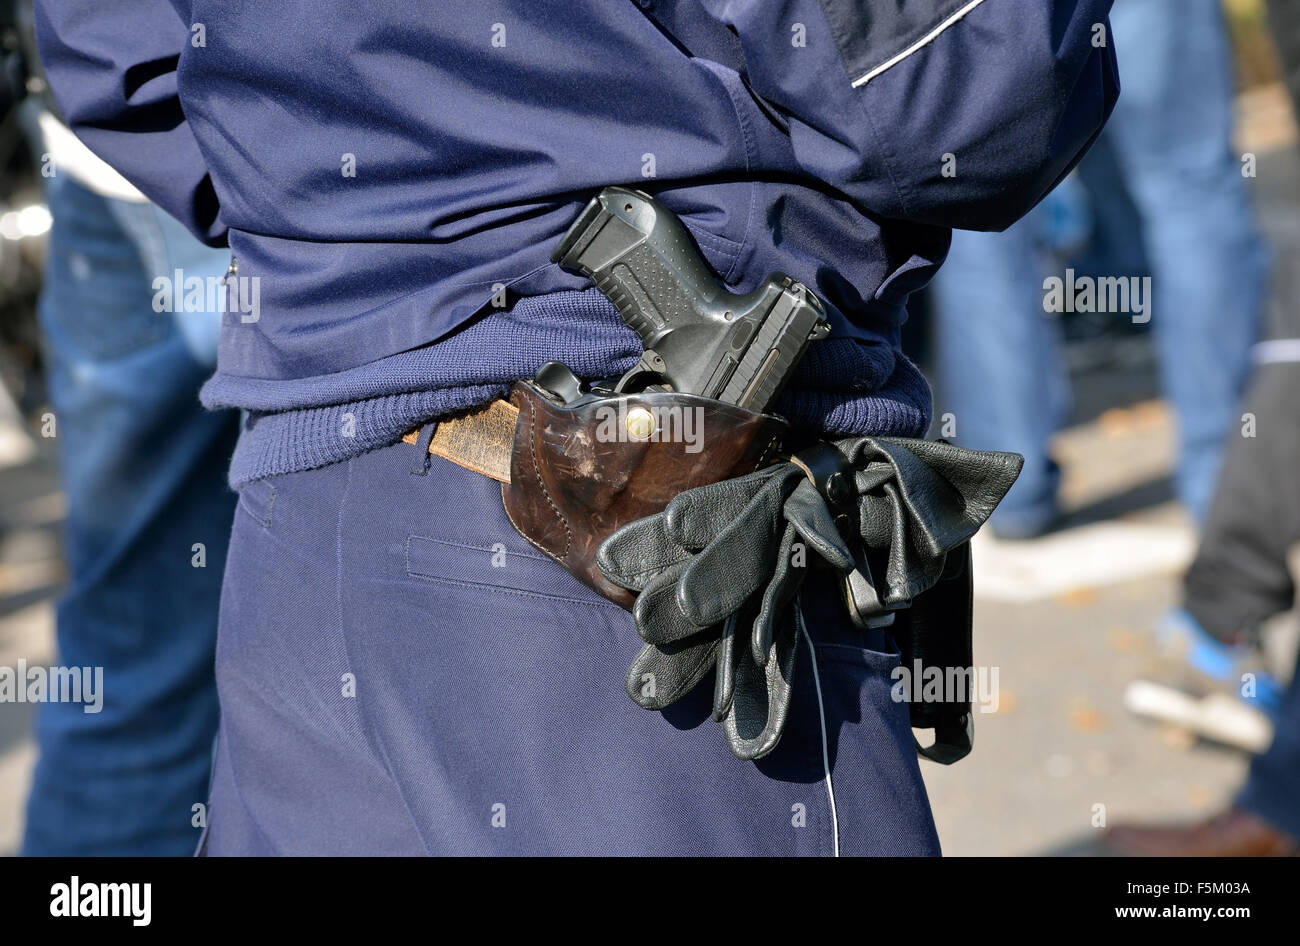 Pistol of a policeman at his holster Stock Photo